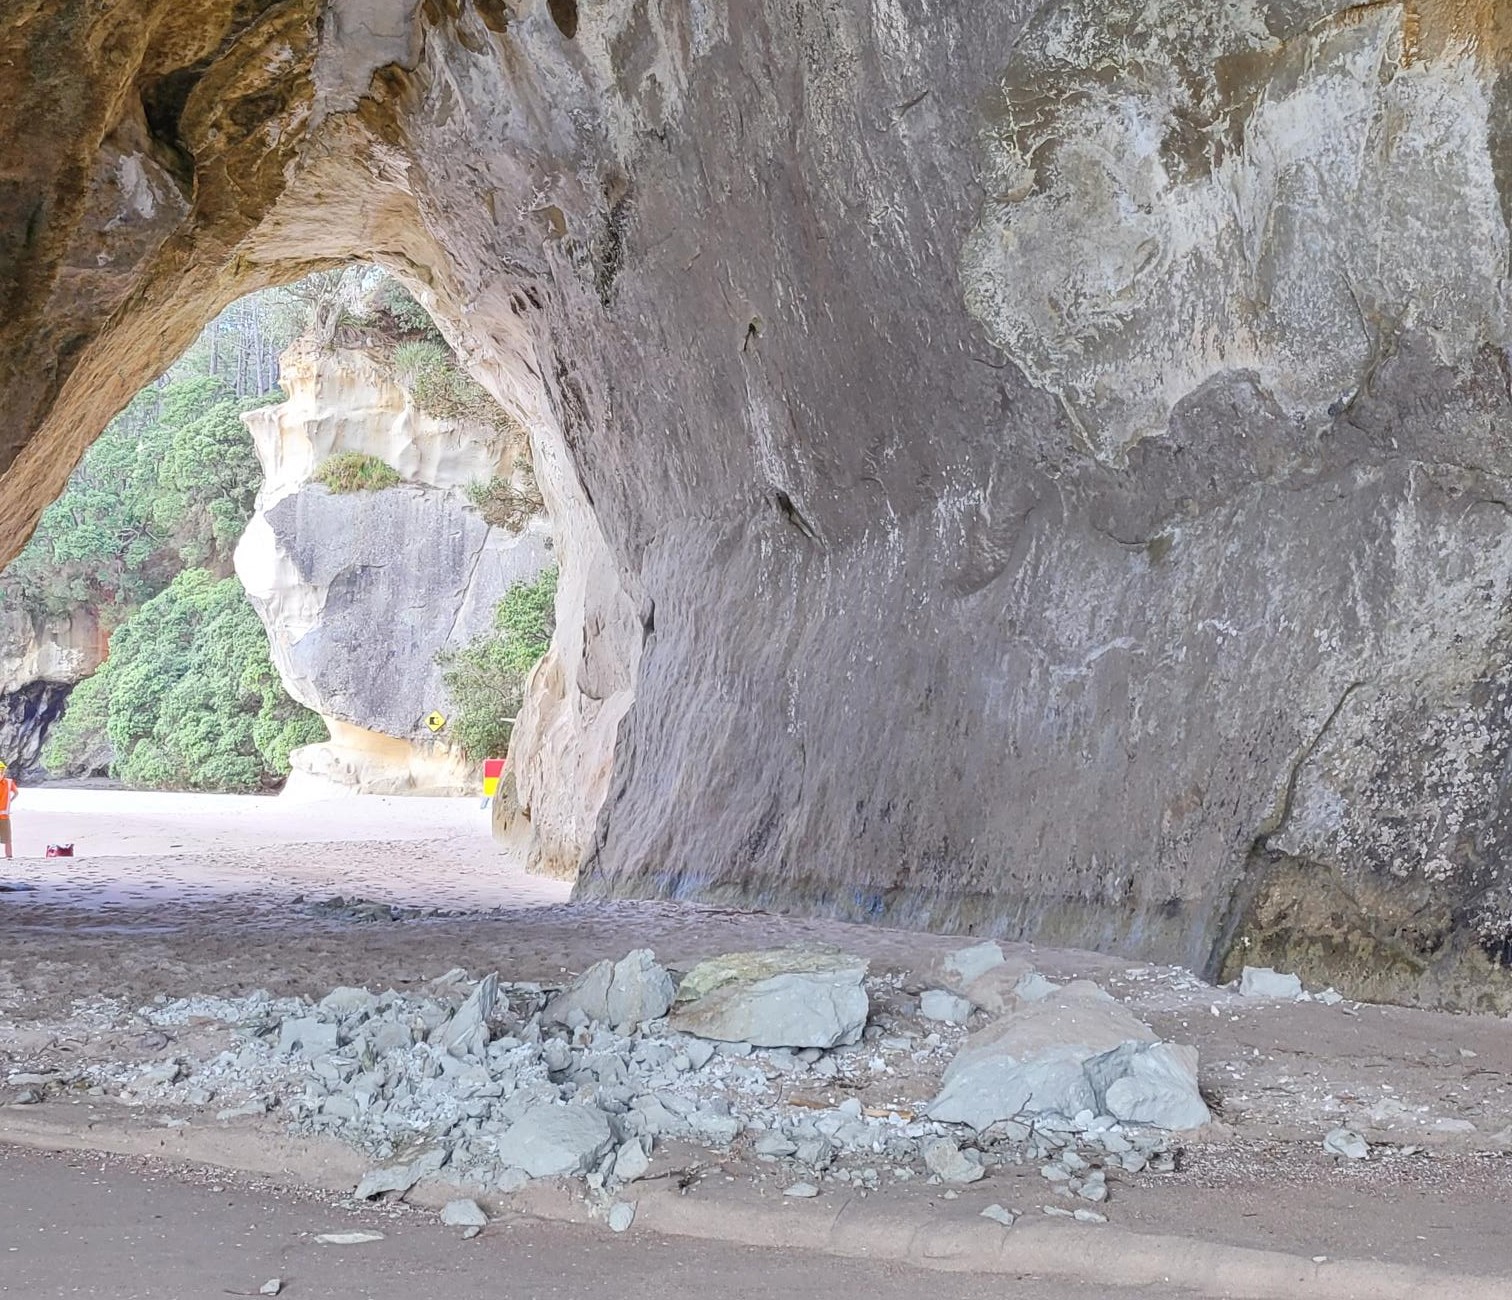 You are currently viewing Rāhui lifted at Coromandel Peninsula’s Cathedral Cove, with caution and respect urged